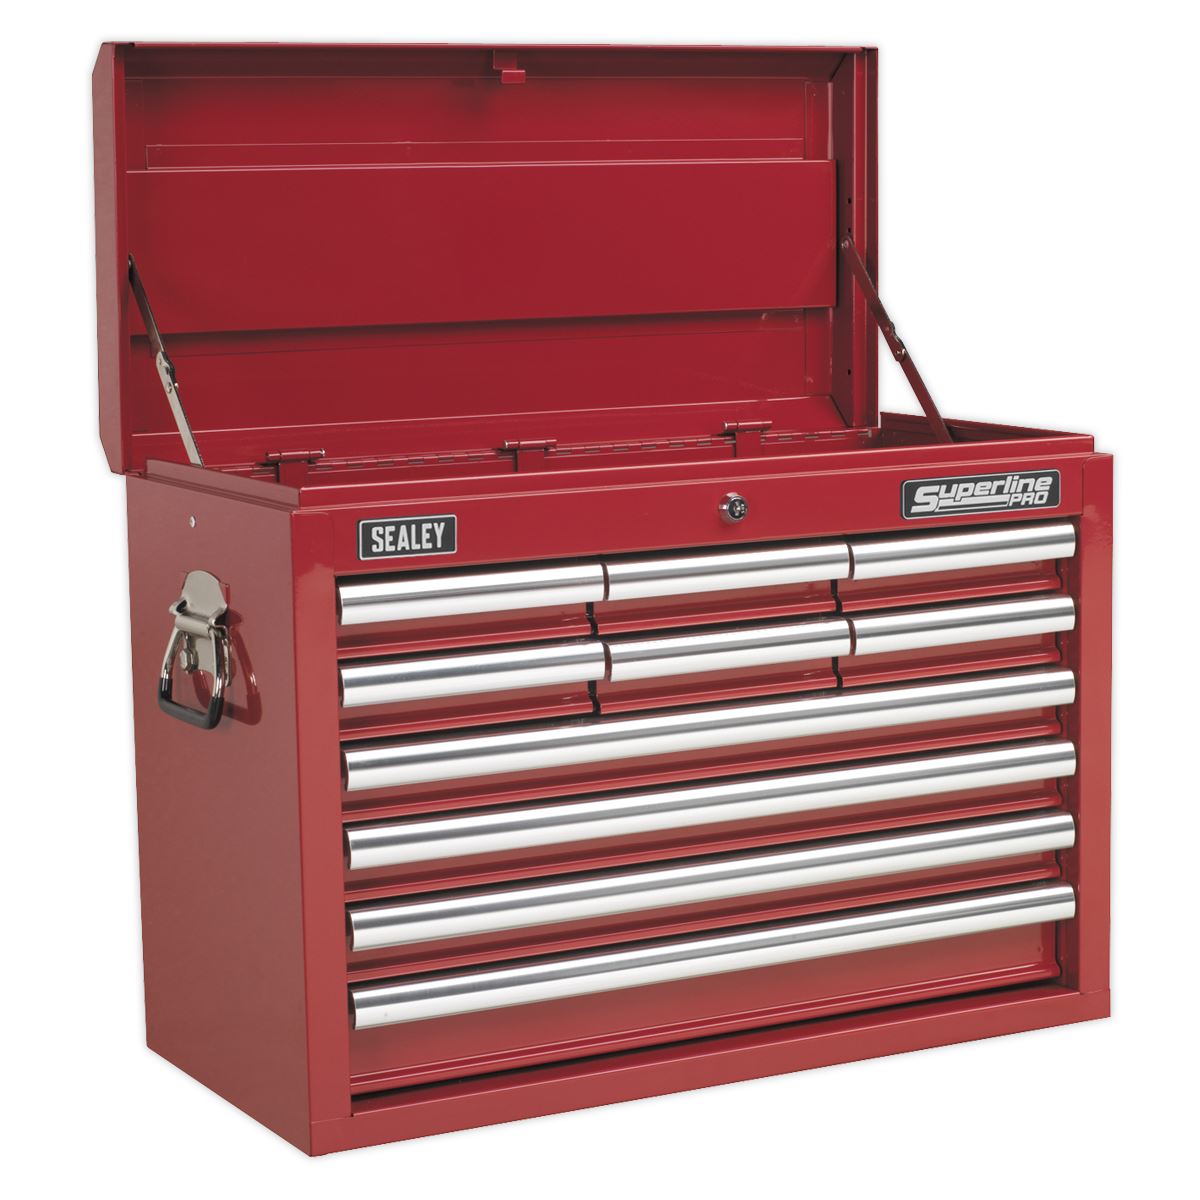 Sealey Superline Pro Topchest 10 Drawer with Ball-Bearing Slides - Red